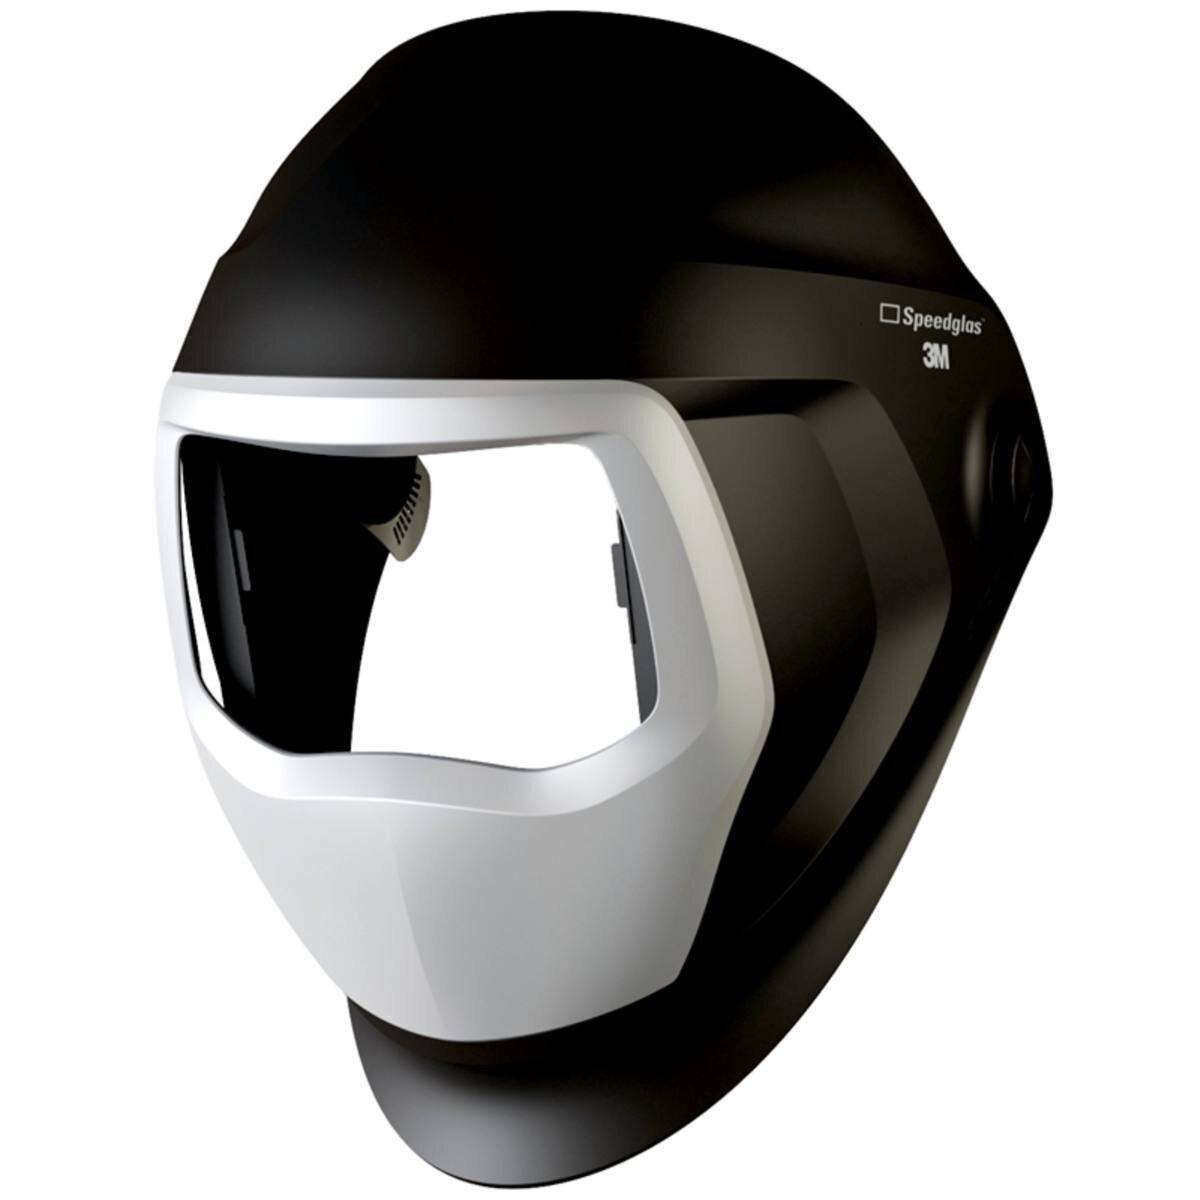 3M Speedglas Welding mask 9100 with side window, without headband, without ADF automatic welding filter #501890